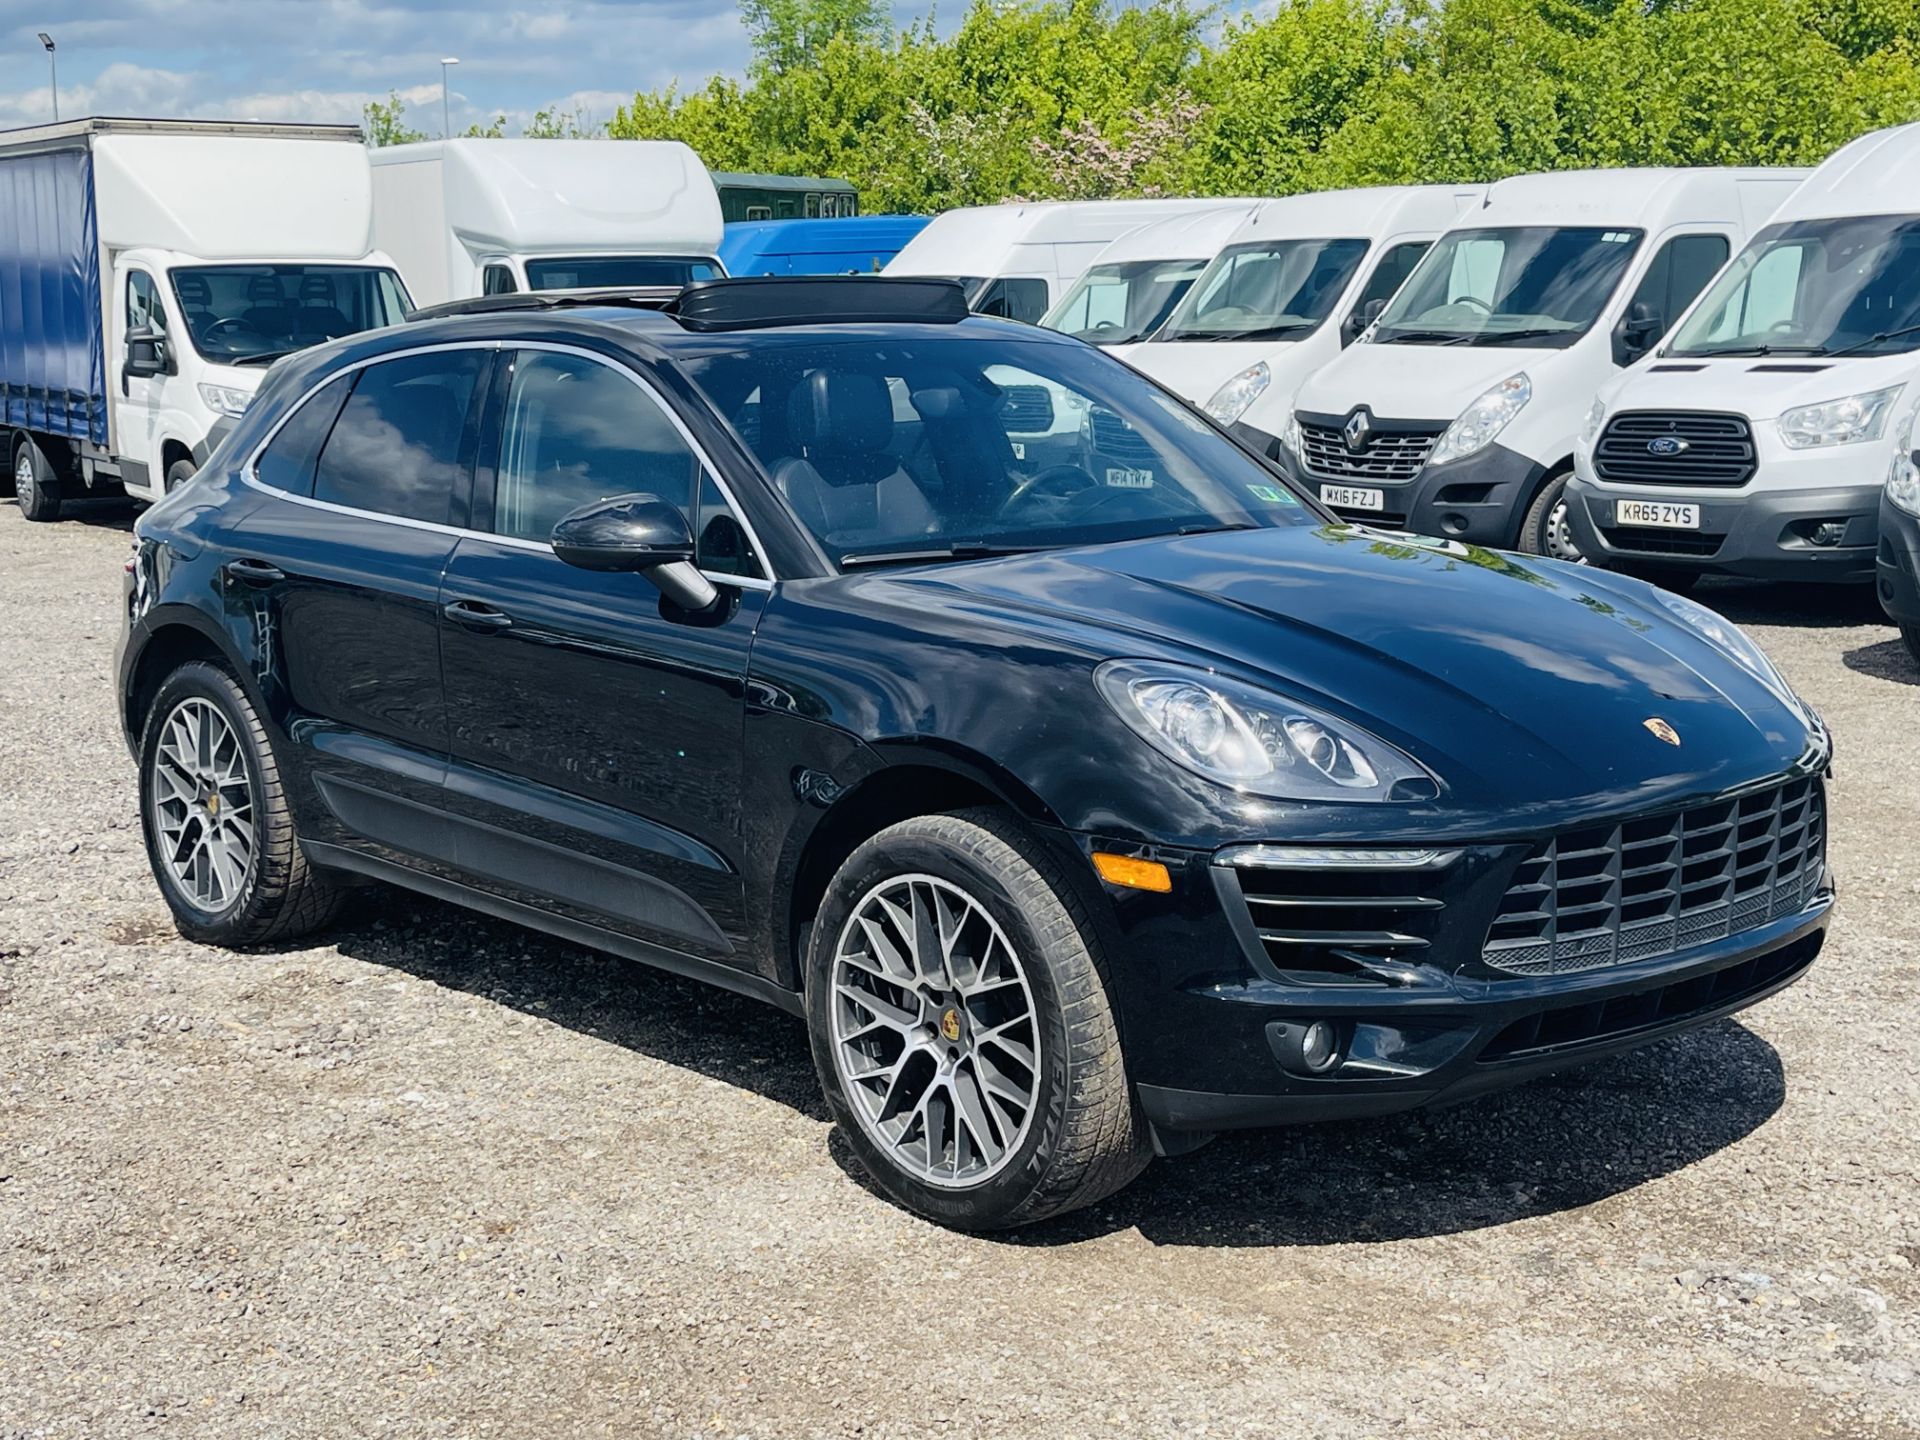 ** ON SALE ** Porsche Macan S 3.0L V6 AWD ' 2015 Year ' Sat Nav - Panoramic Roof - ULEZ Compliant - Image 2 of 44